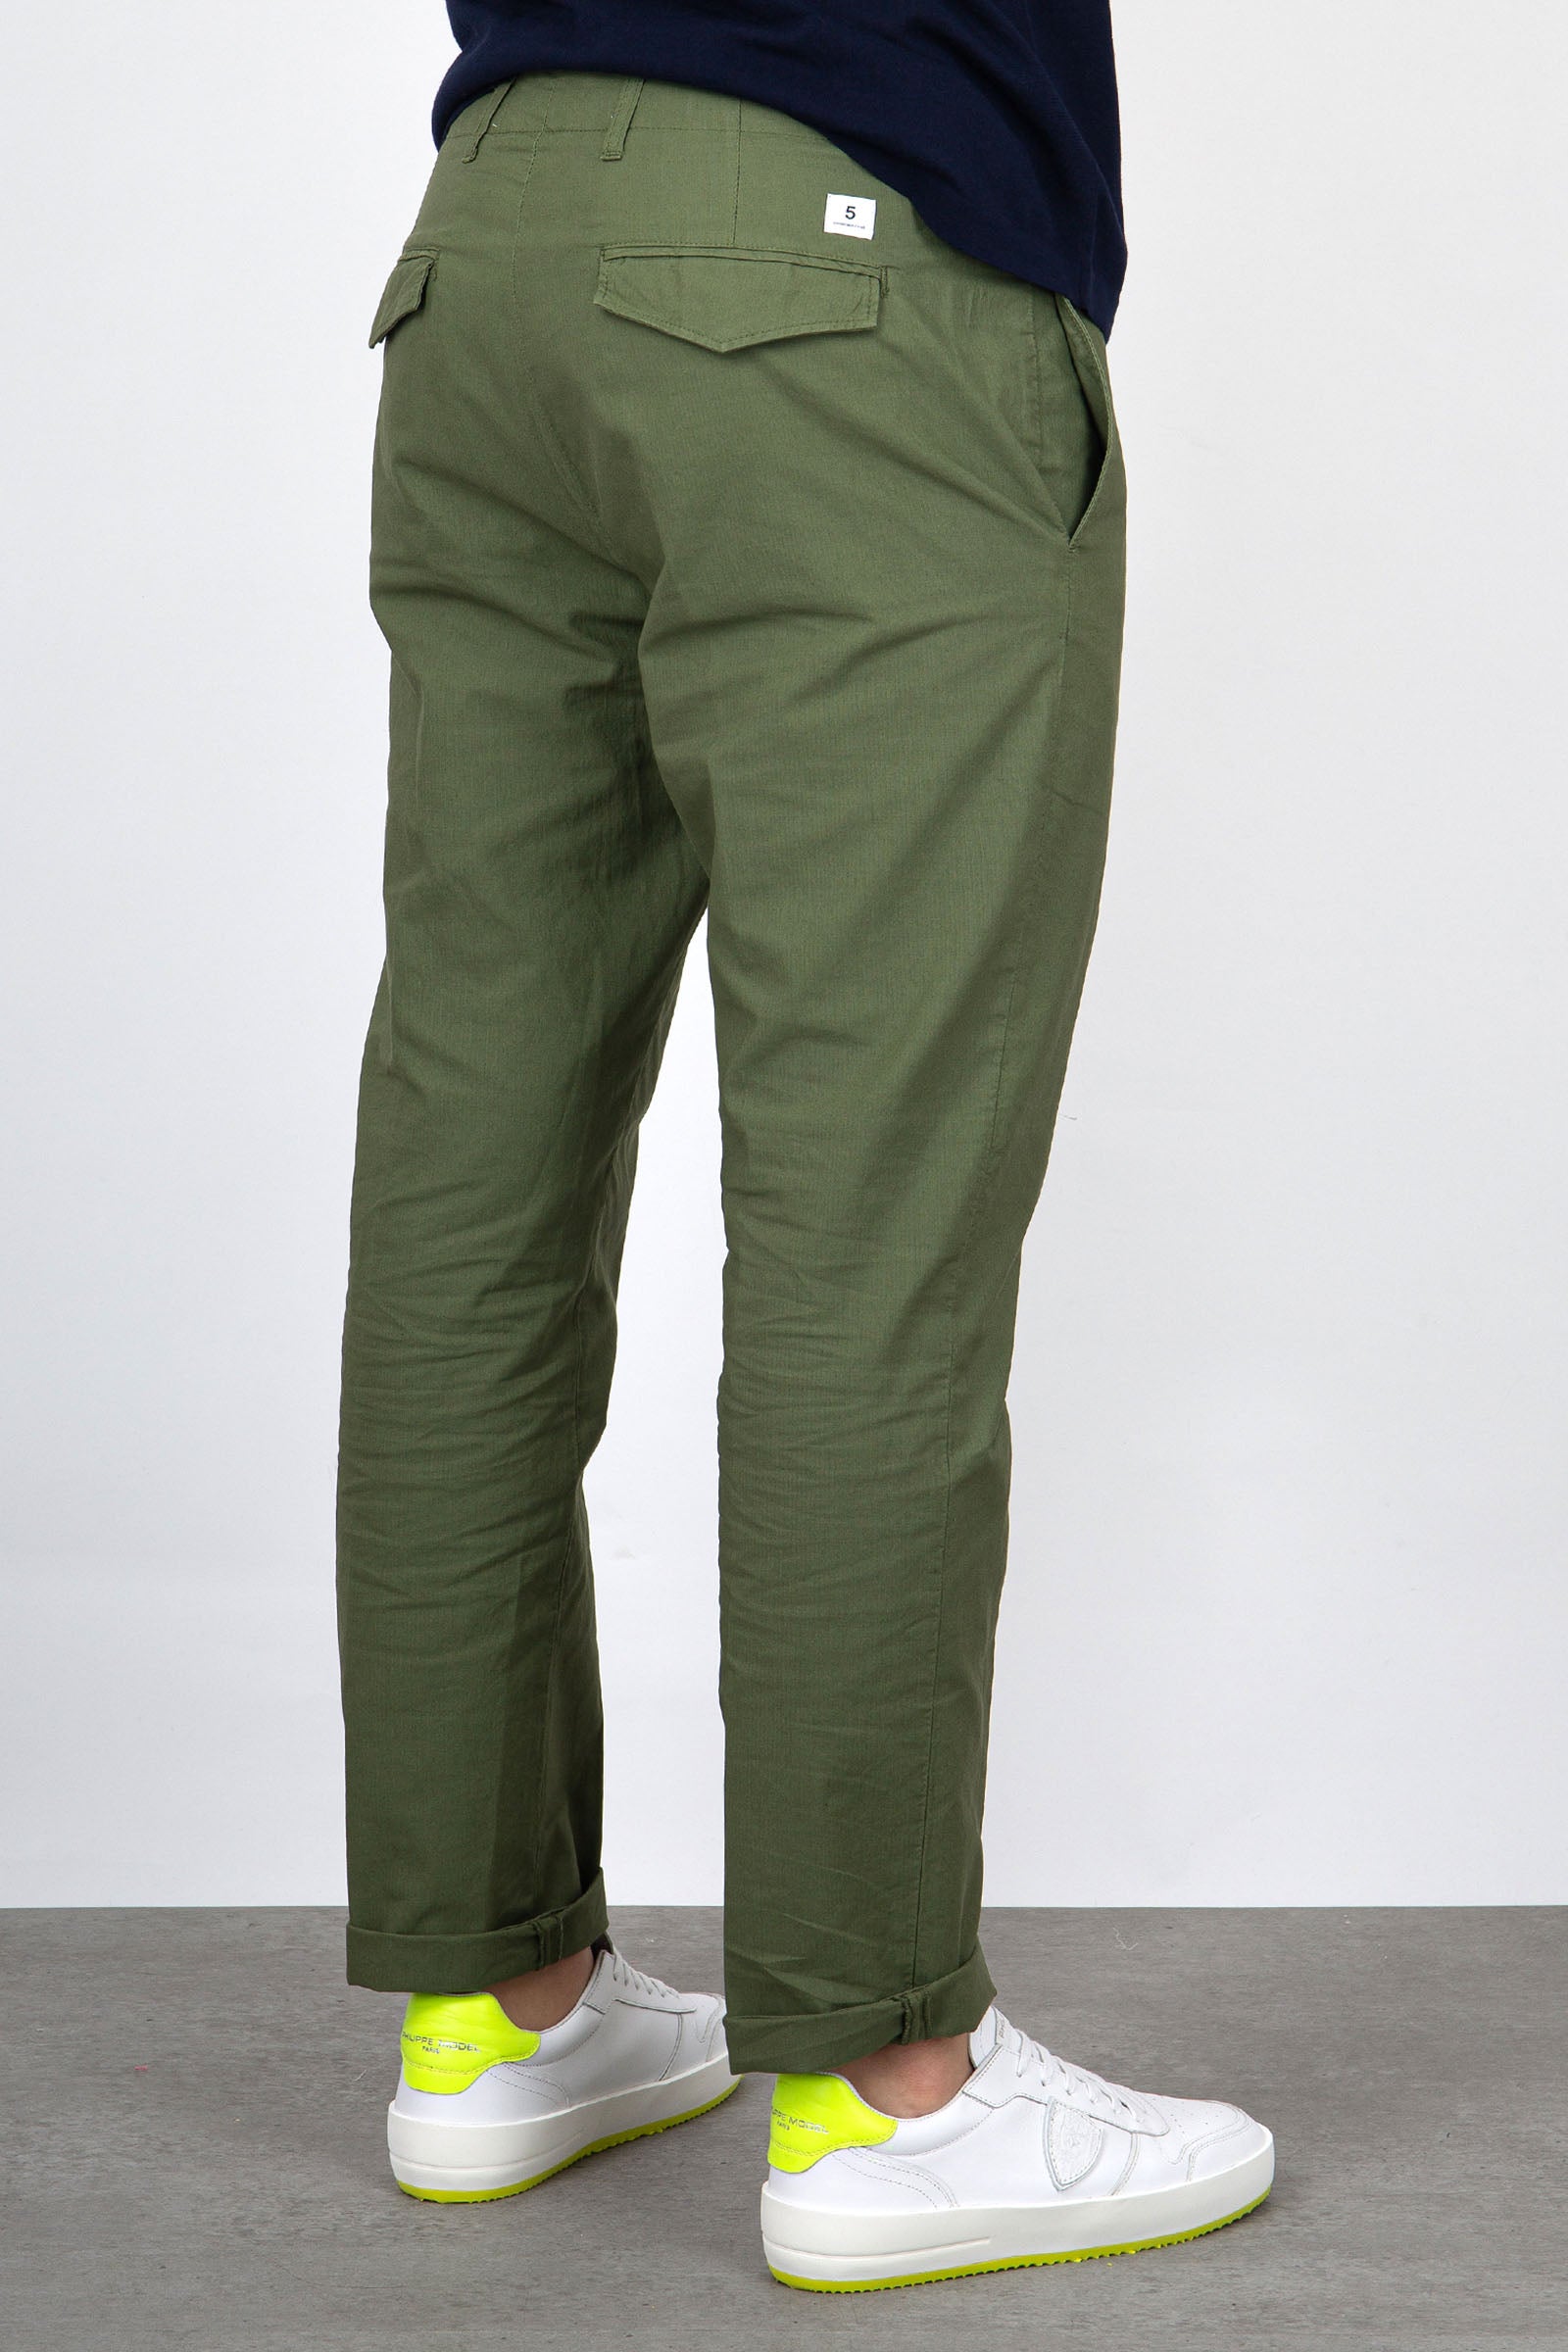 Department Five Green Military Cotton Trousers - 5